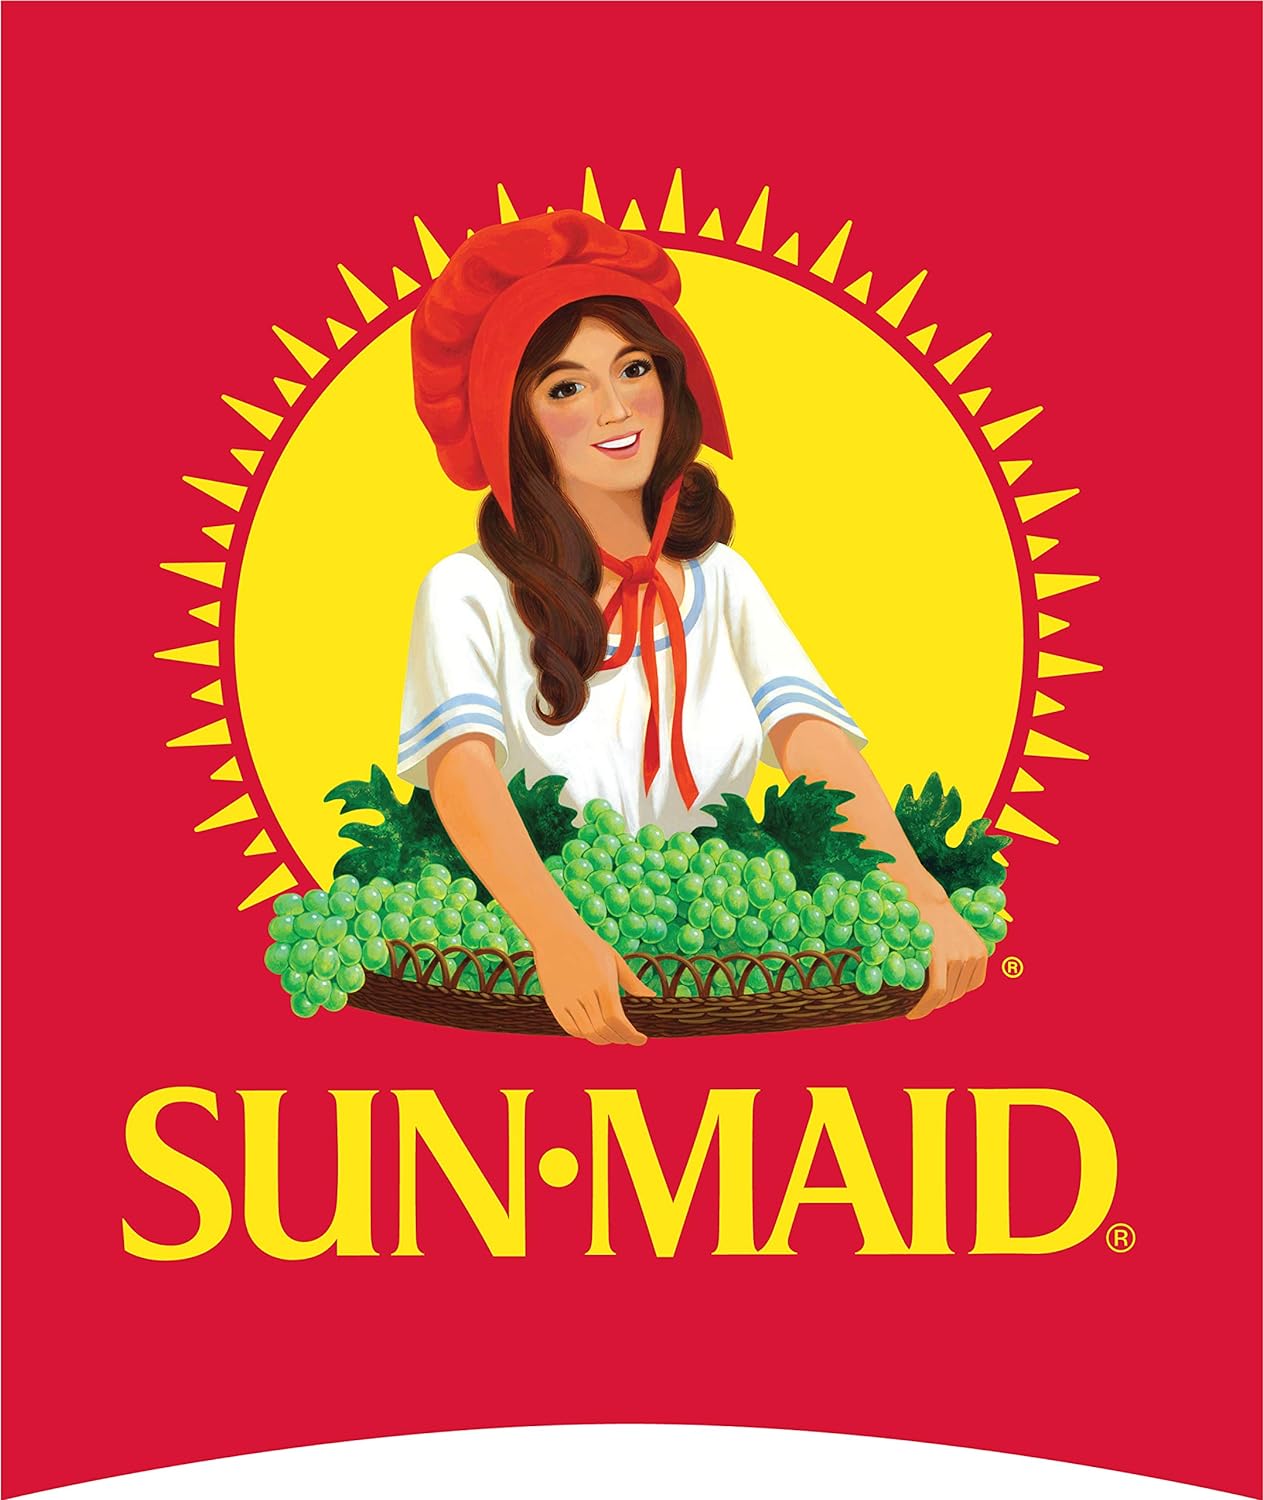 Sun-Maid California Sun-Dried Raisins - 13 oz Resealable Canister - Dried Fruit Snack for Lunches, Snacks, and Natural Sweeteners : Raisins Produce : Everything Else